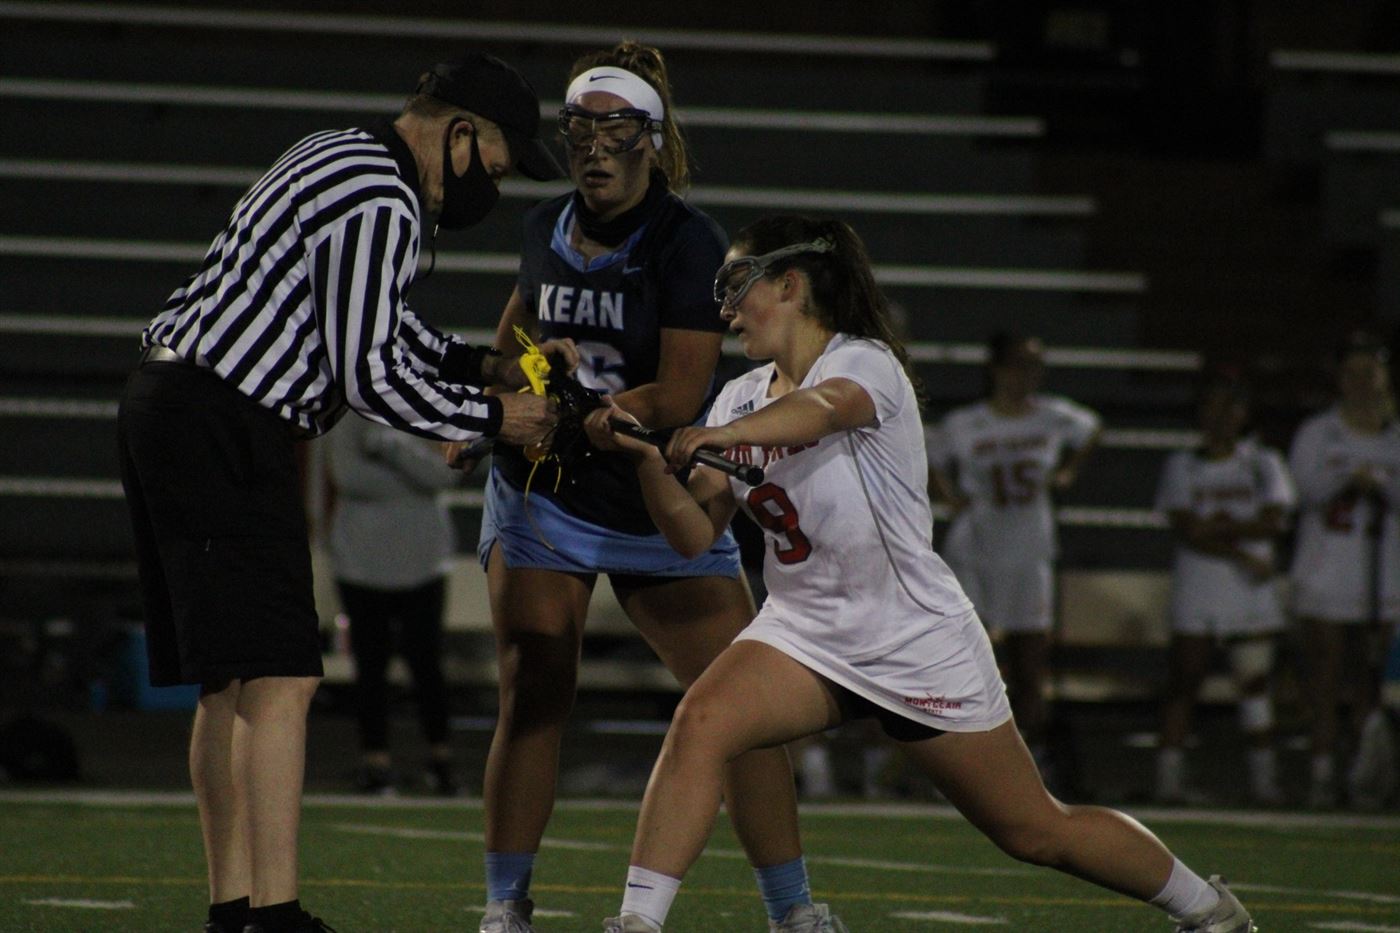 Costigan prepares for the draw against a Kean player in an April 13 contest against the Cougars. Corey Annan | The Montclarion